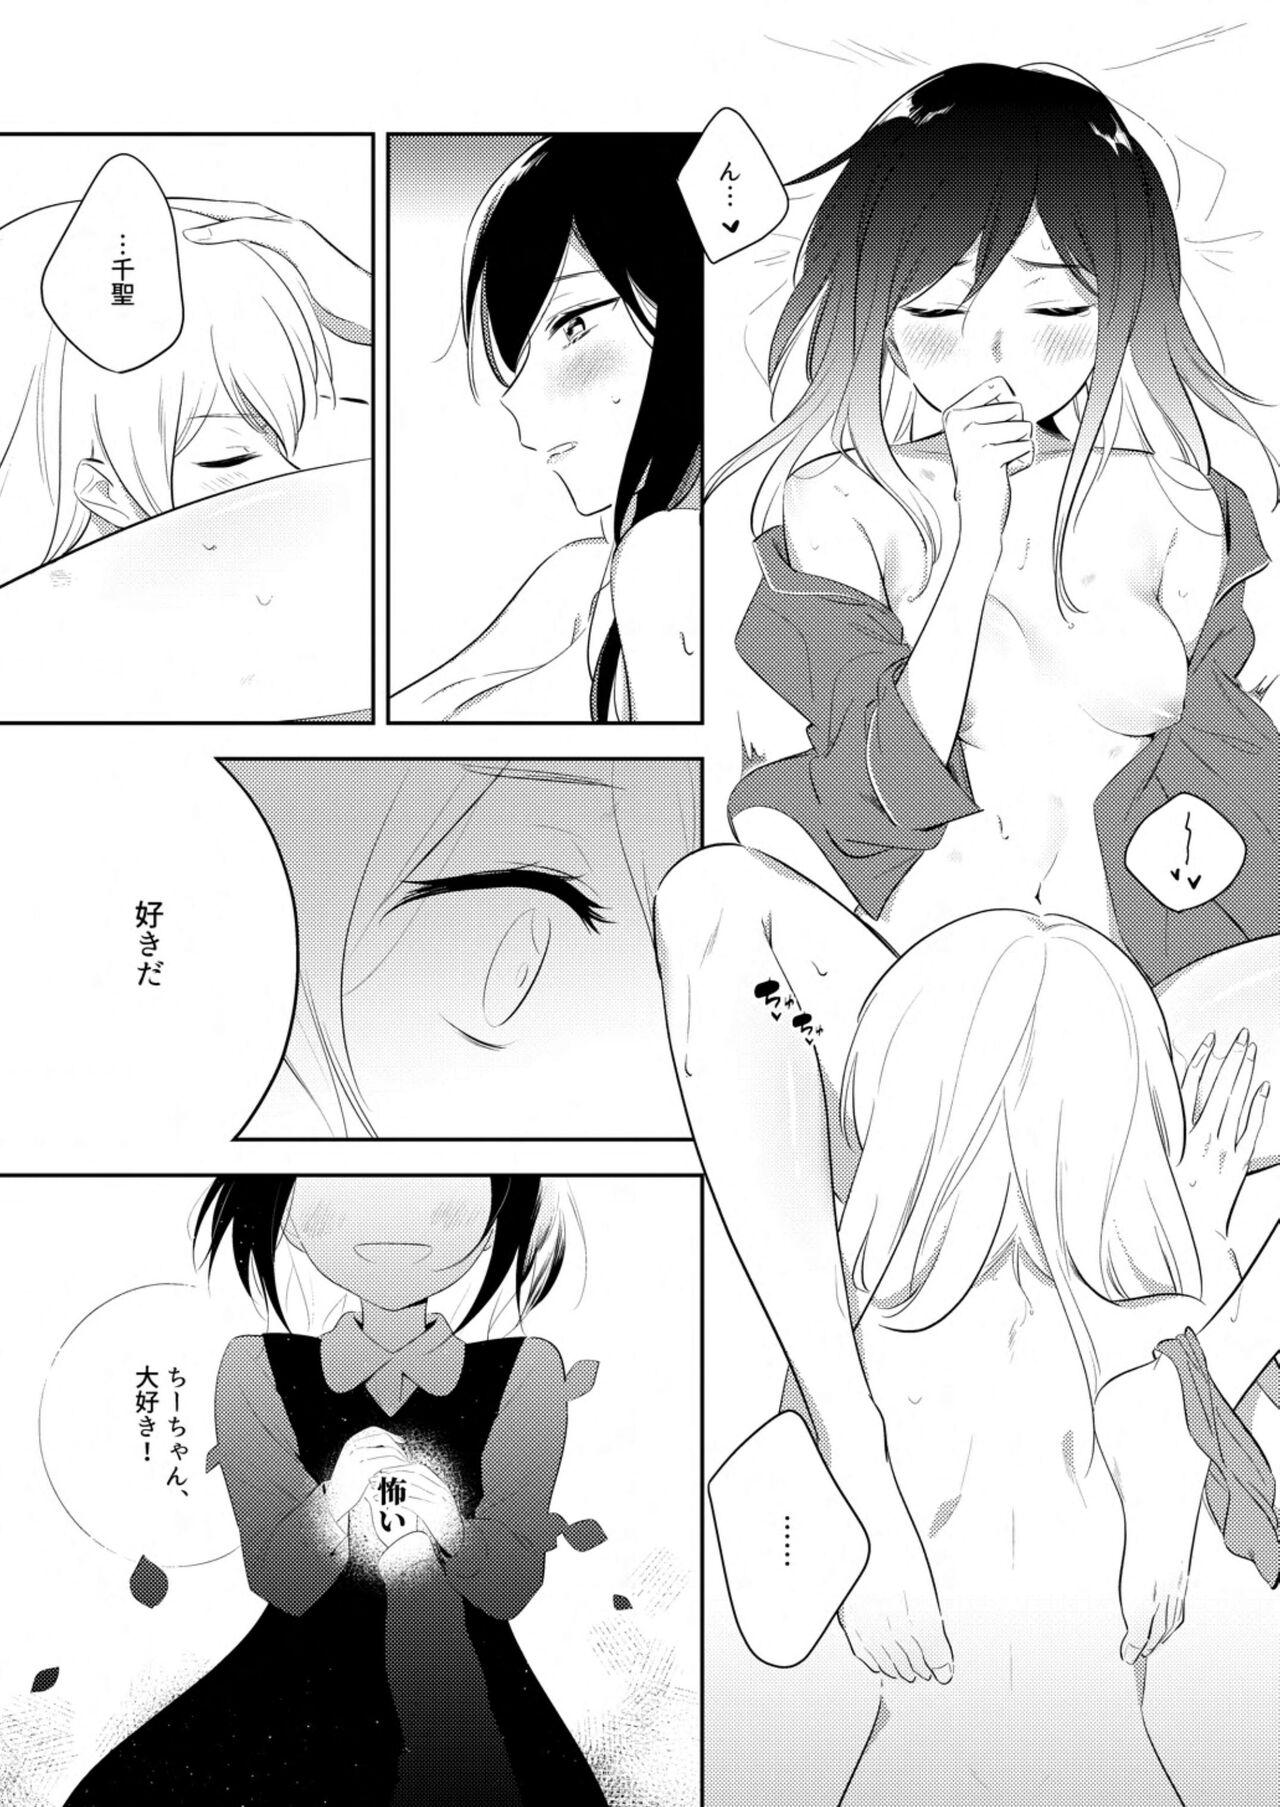 Amadora 《By Their Own Beauties》 - Bang dream Spanking - Page 9